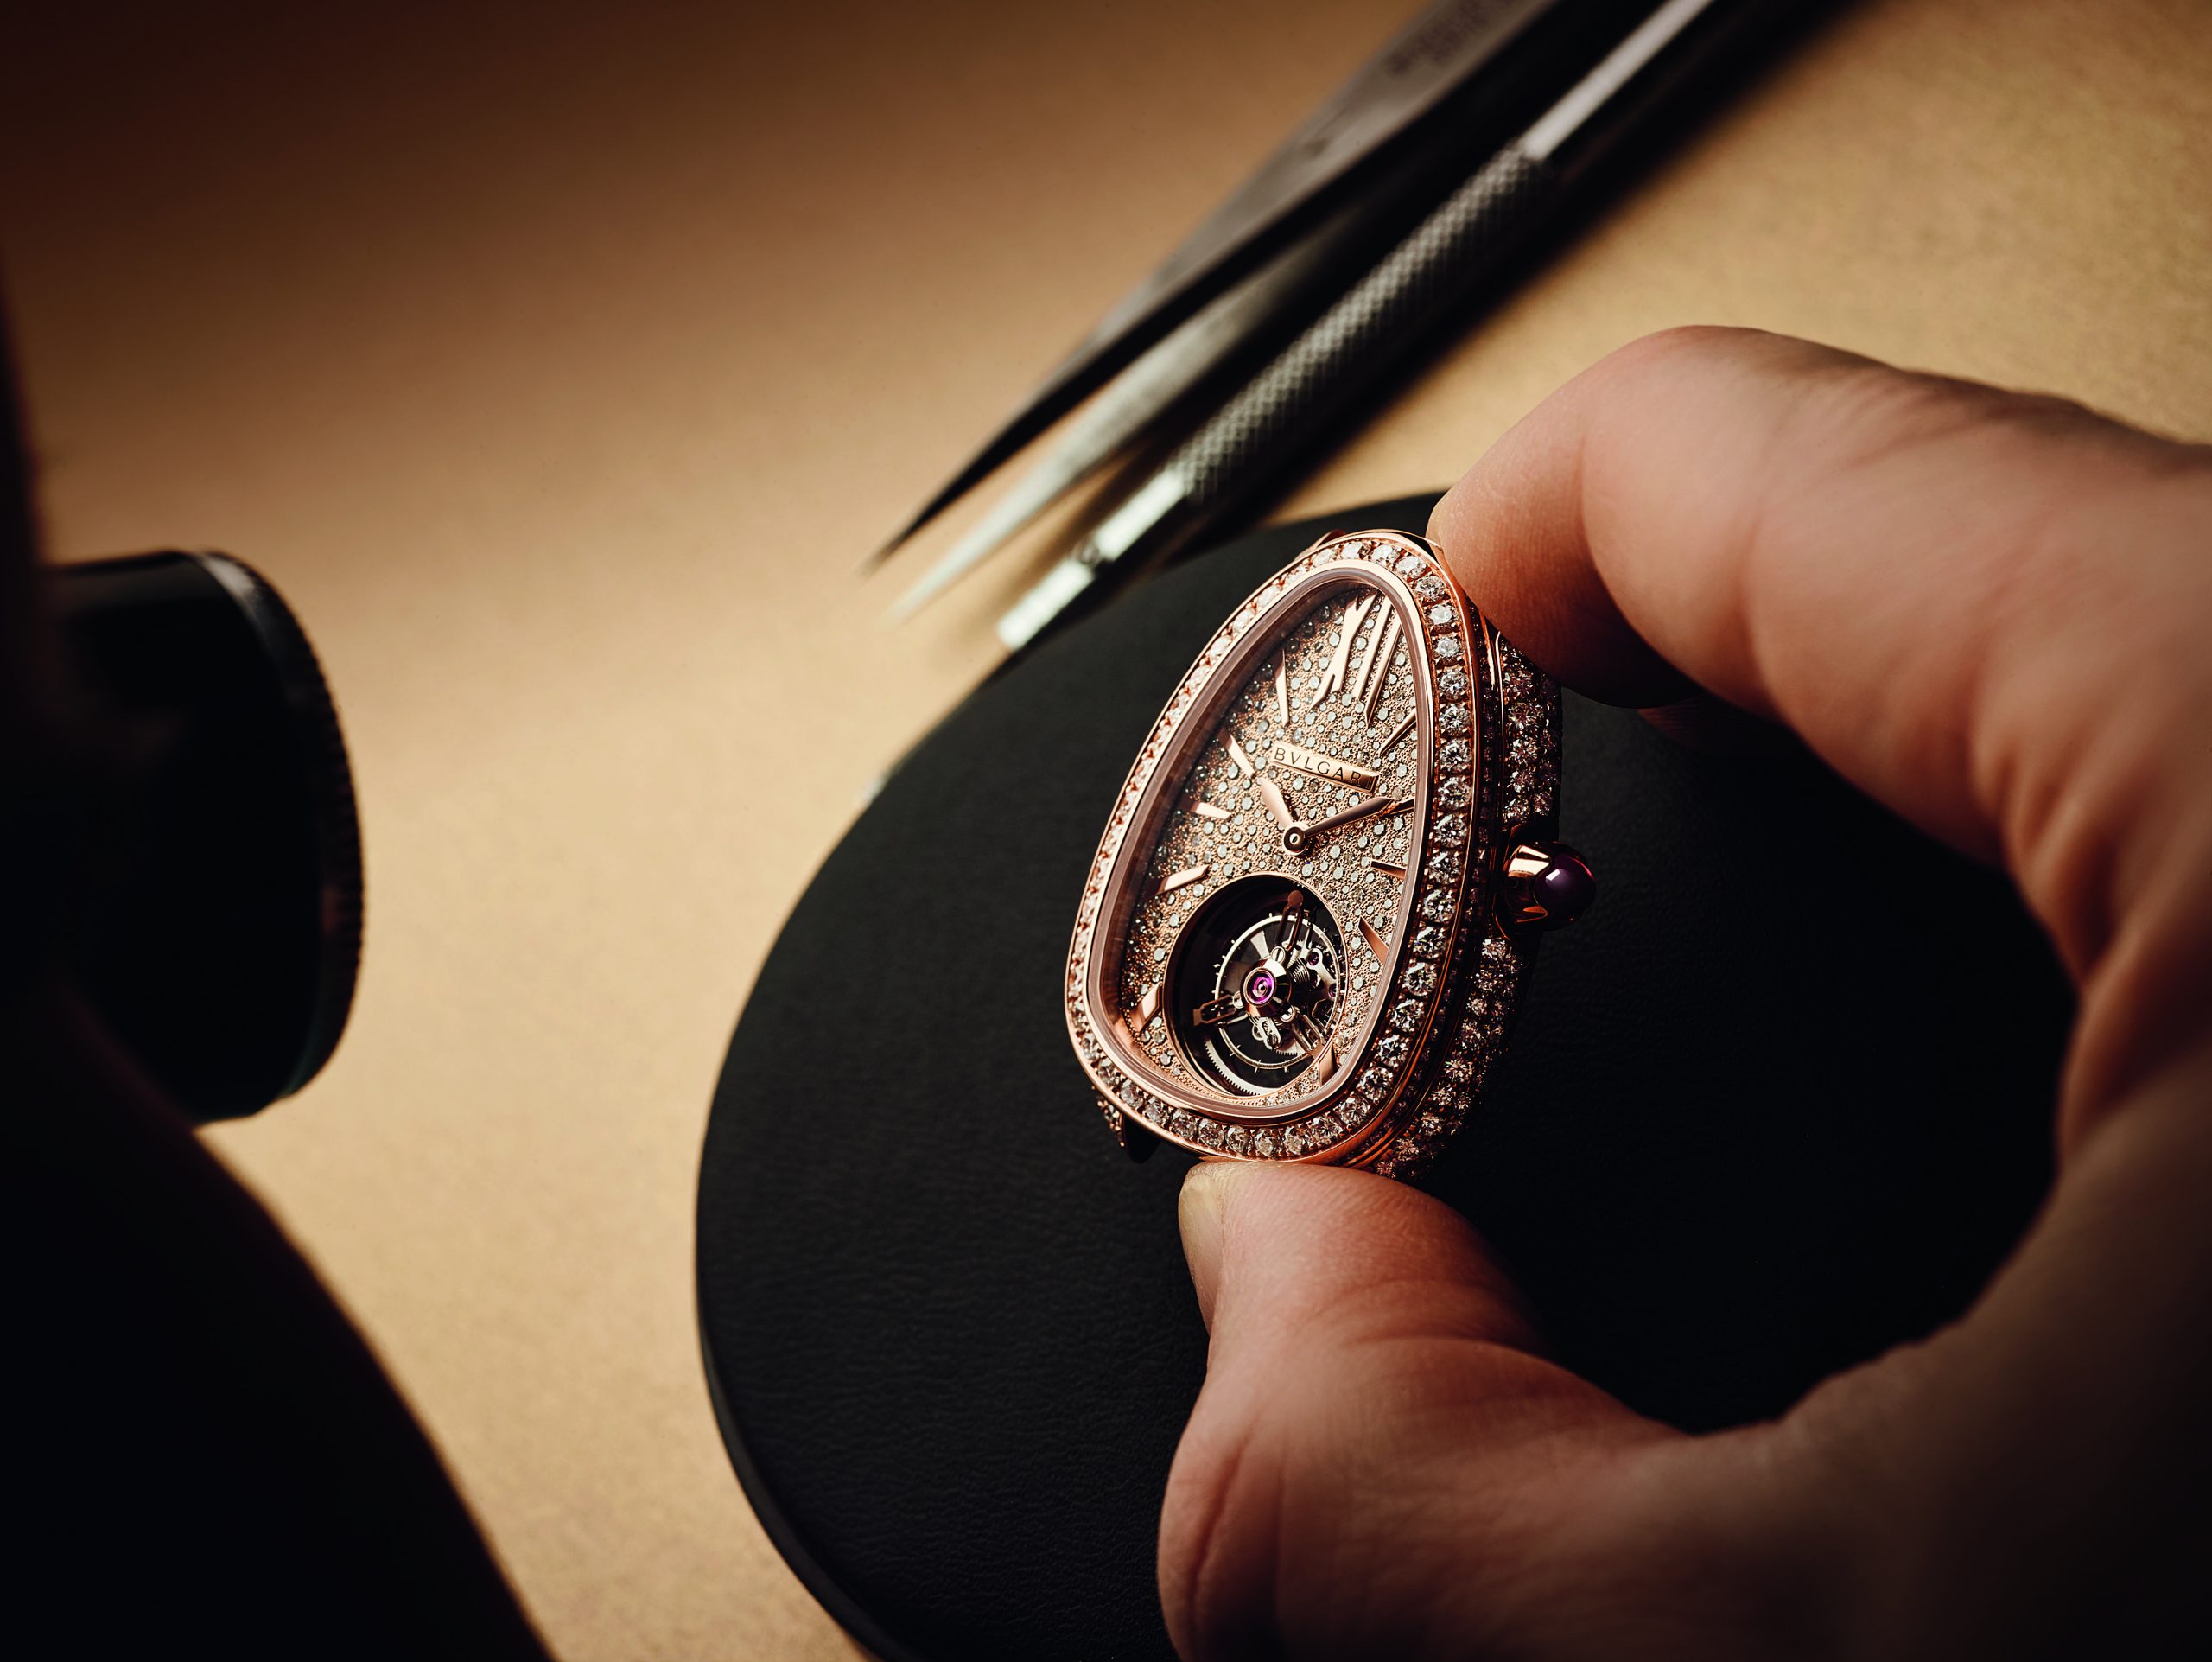 The first ever watch week organized by LVMH watches & jewelry